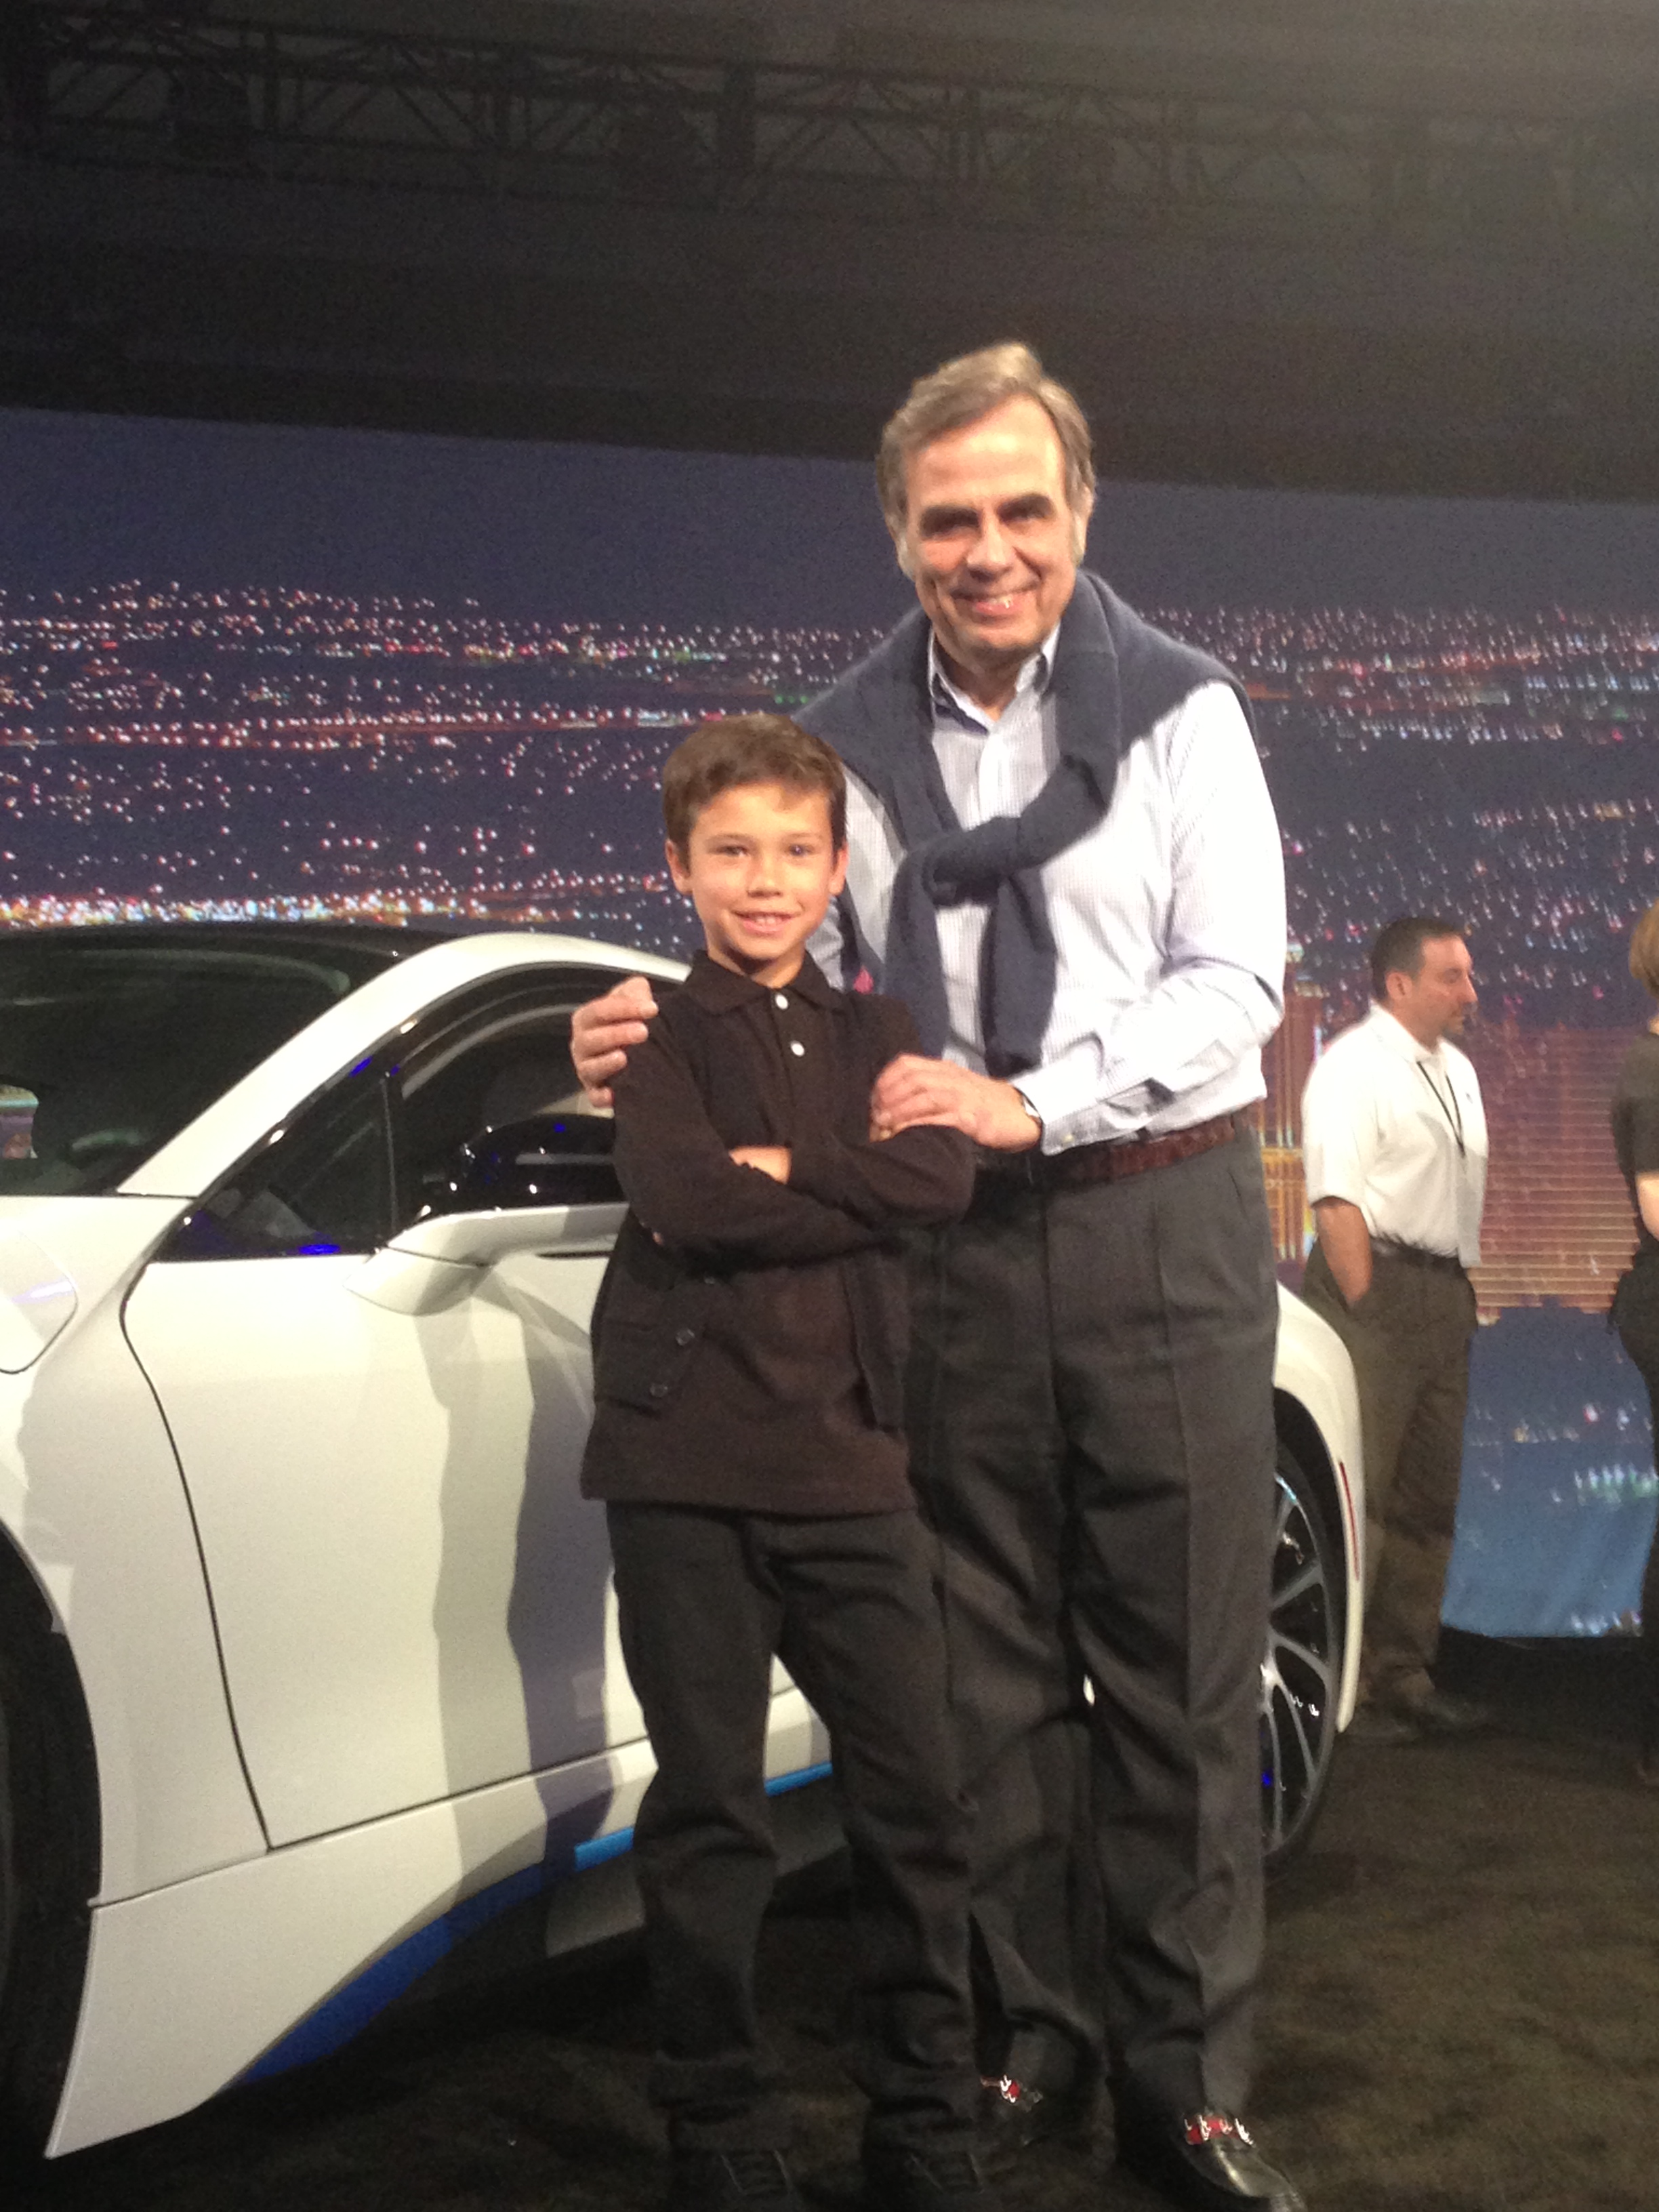 Luca announcer at launch of new BMW icar with CEO of BMW in Las Vegas.